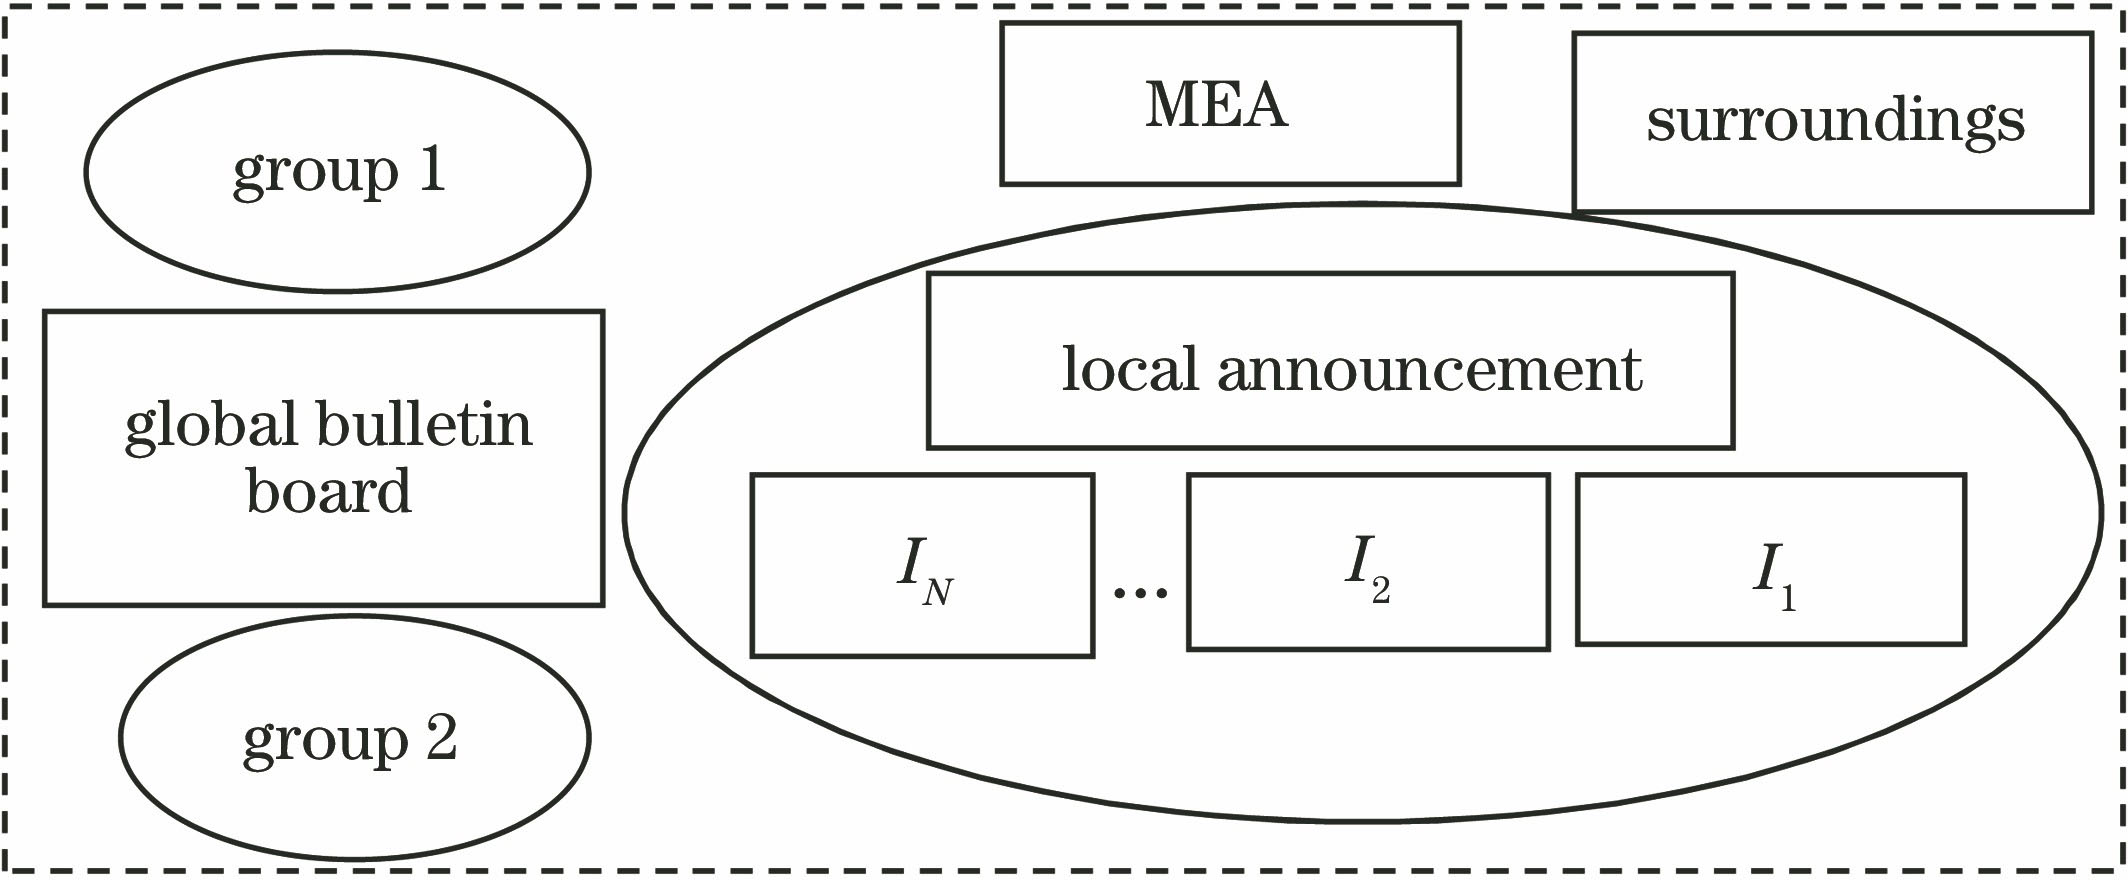 Composition of MEA